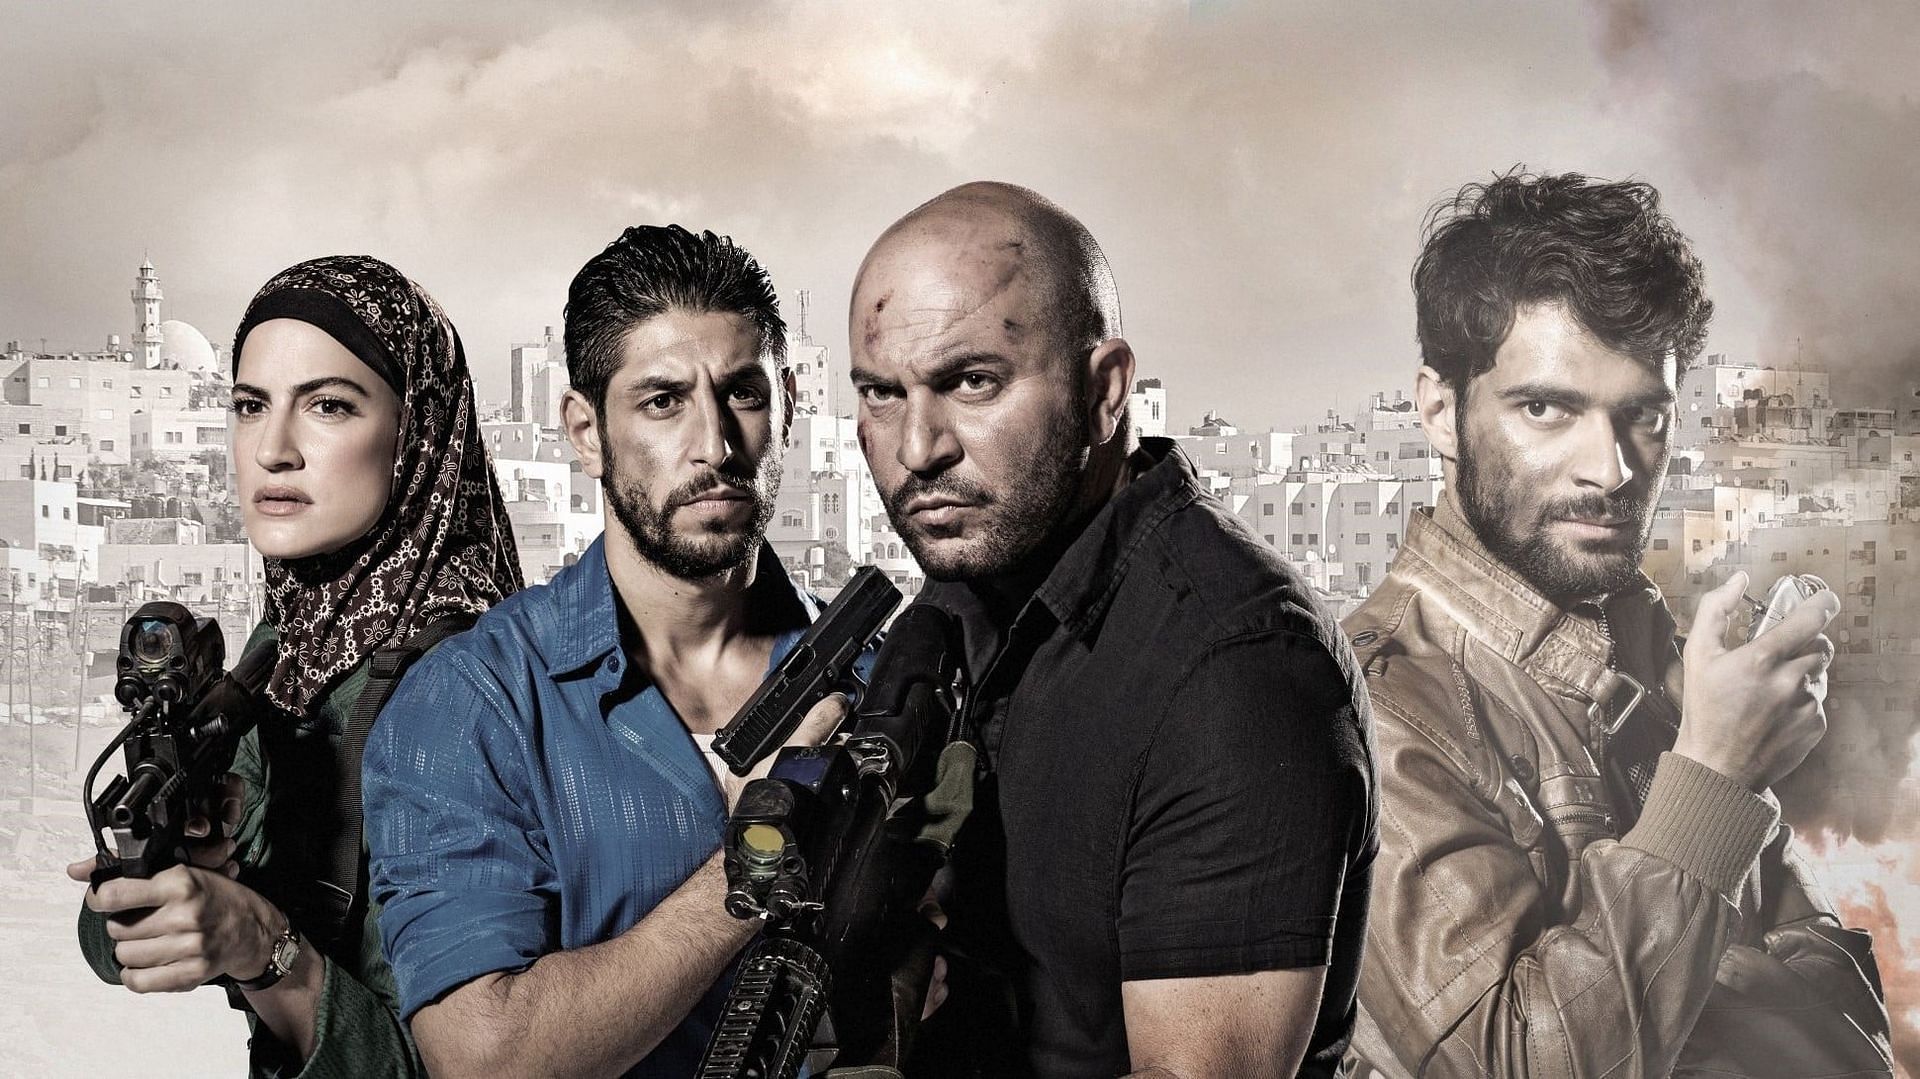 Fauda season 4 release date, air time, plot, and more